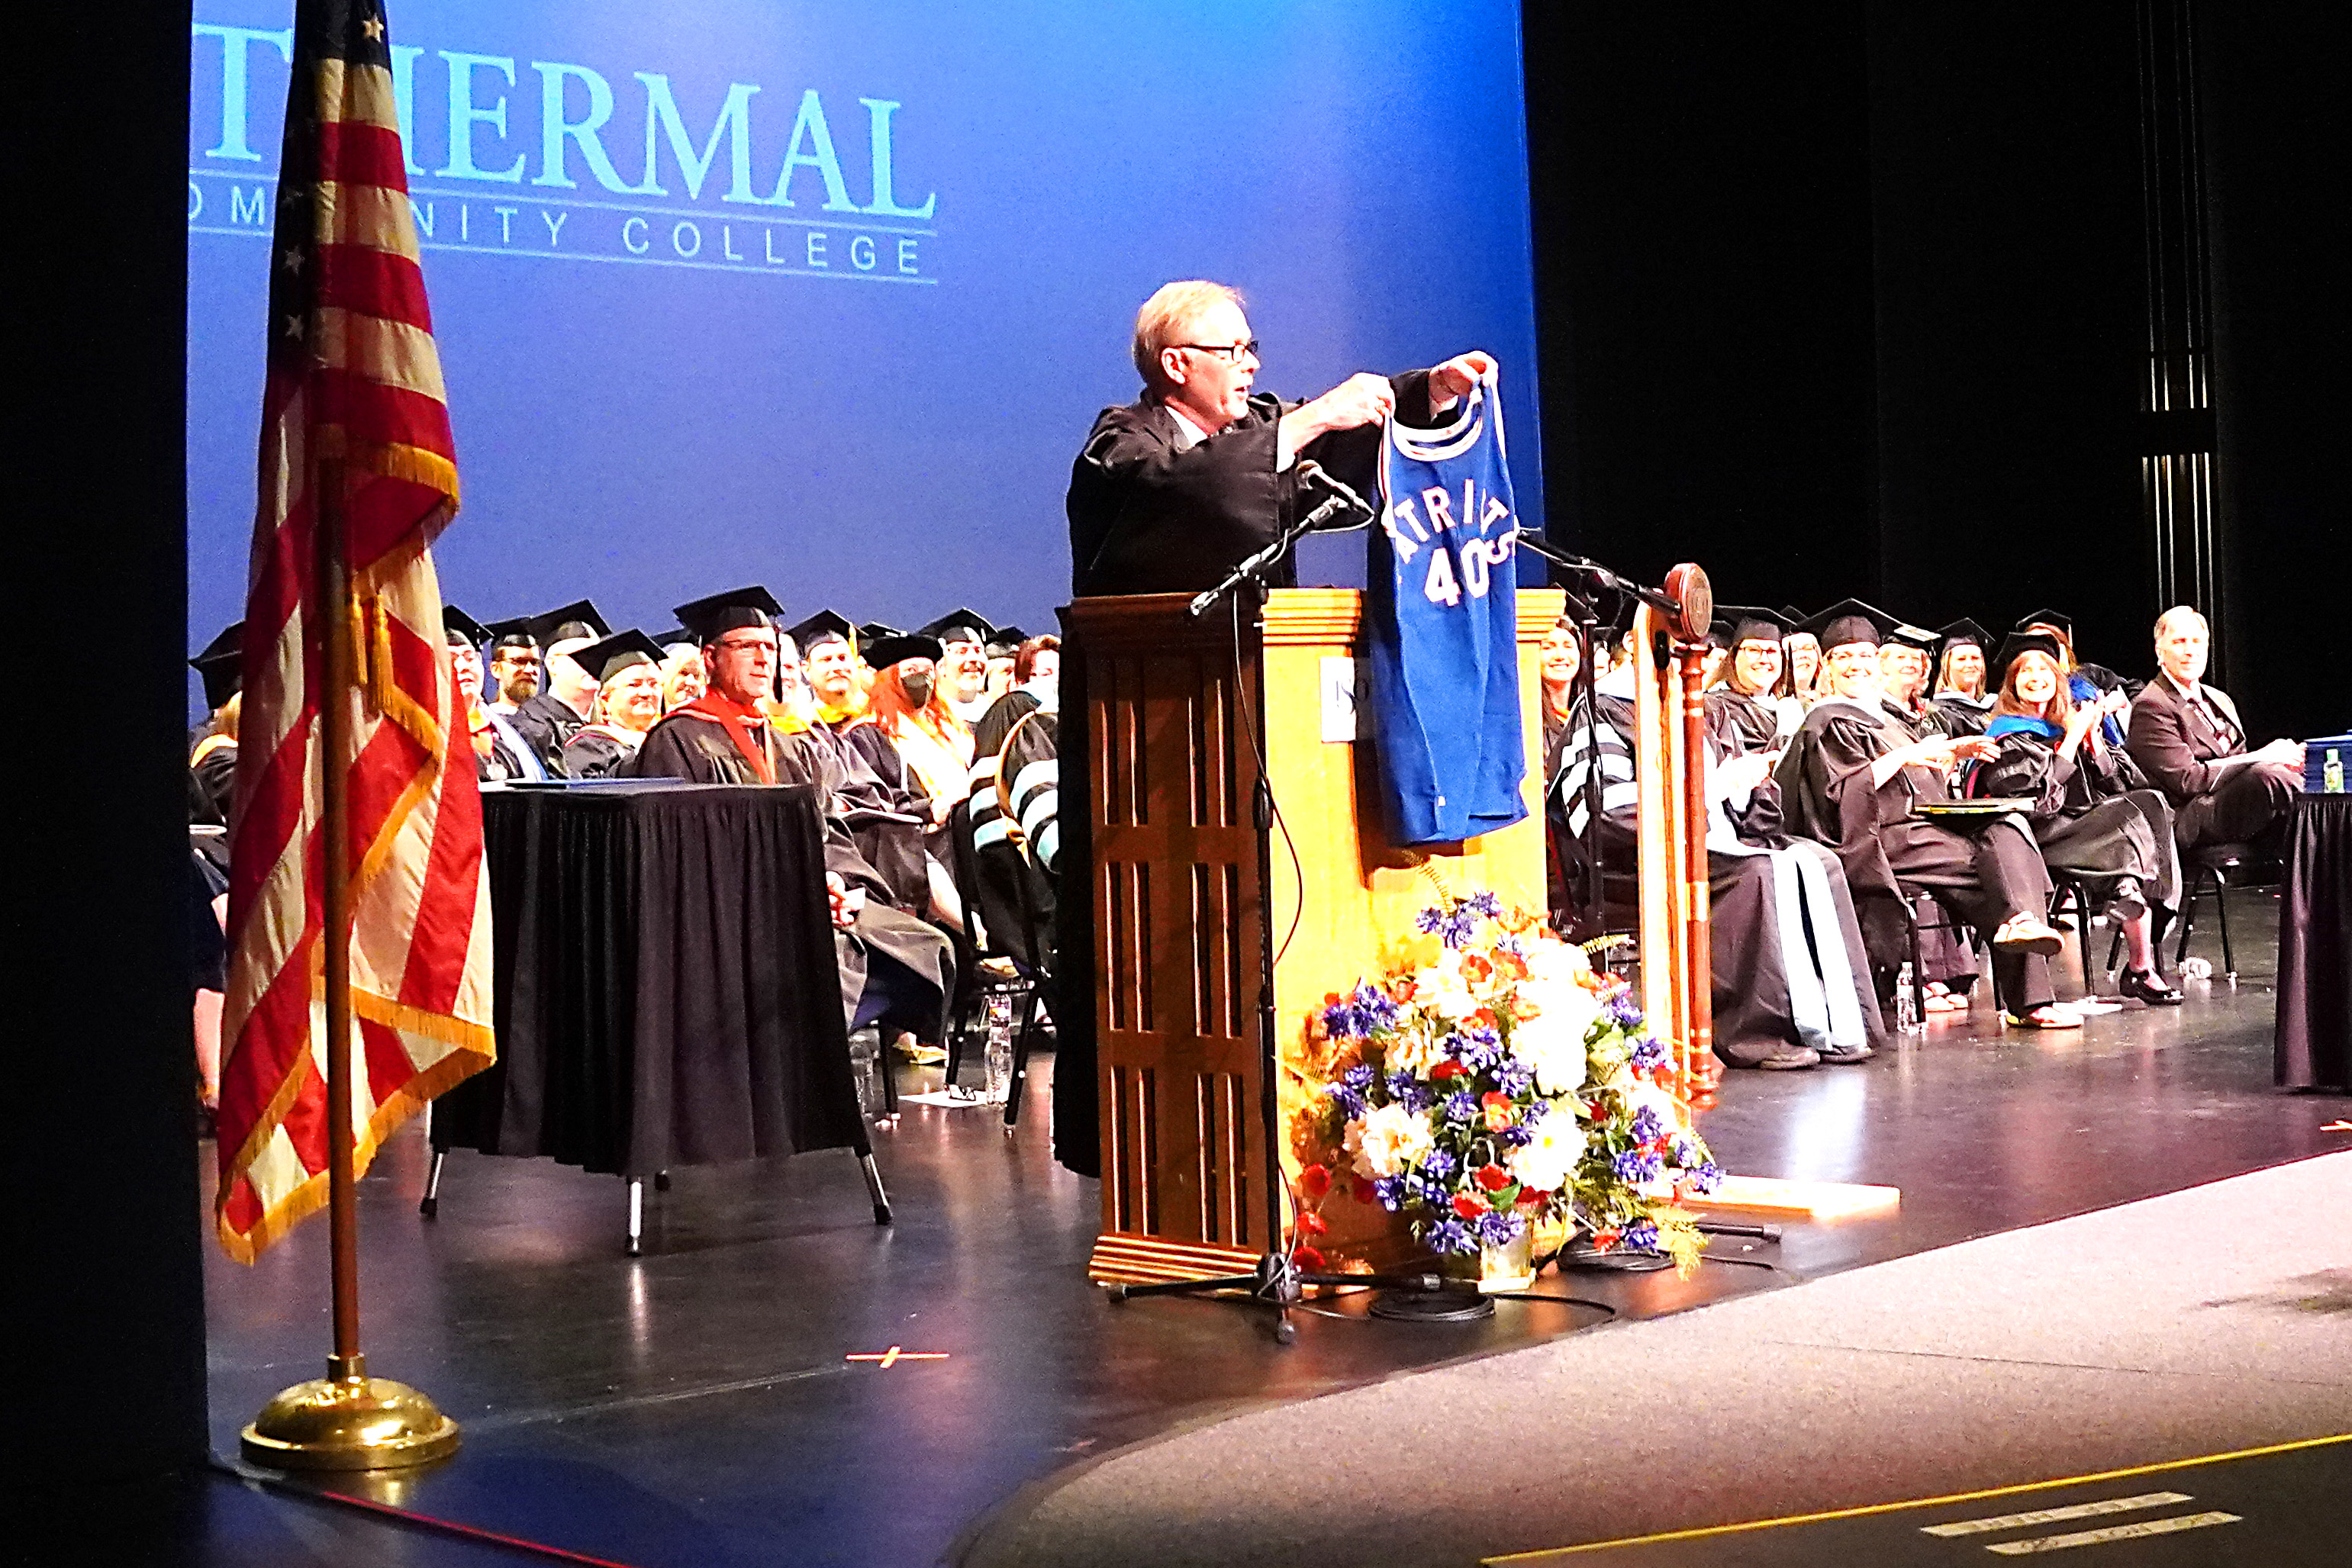 Bill McBrayer holding basketball jersey from the lecturn